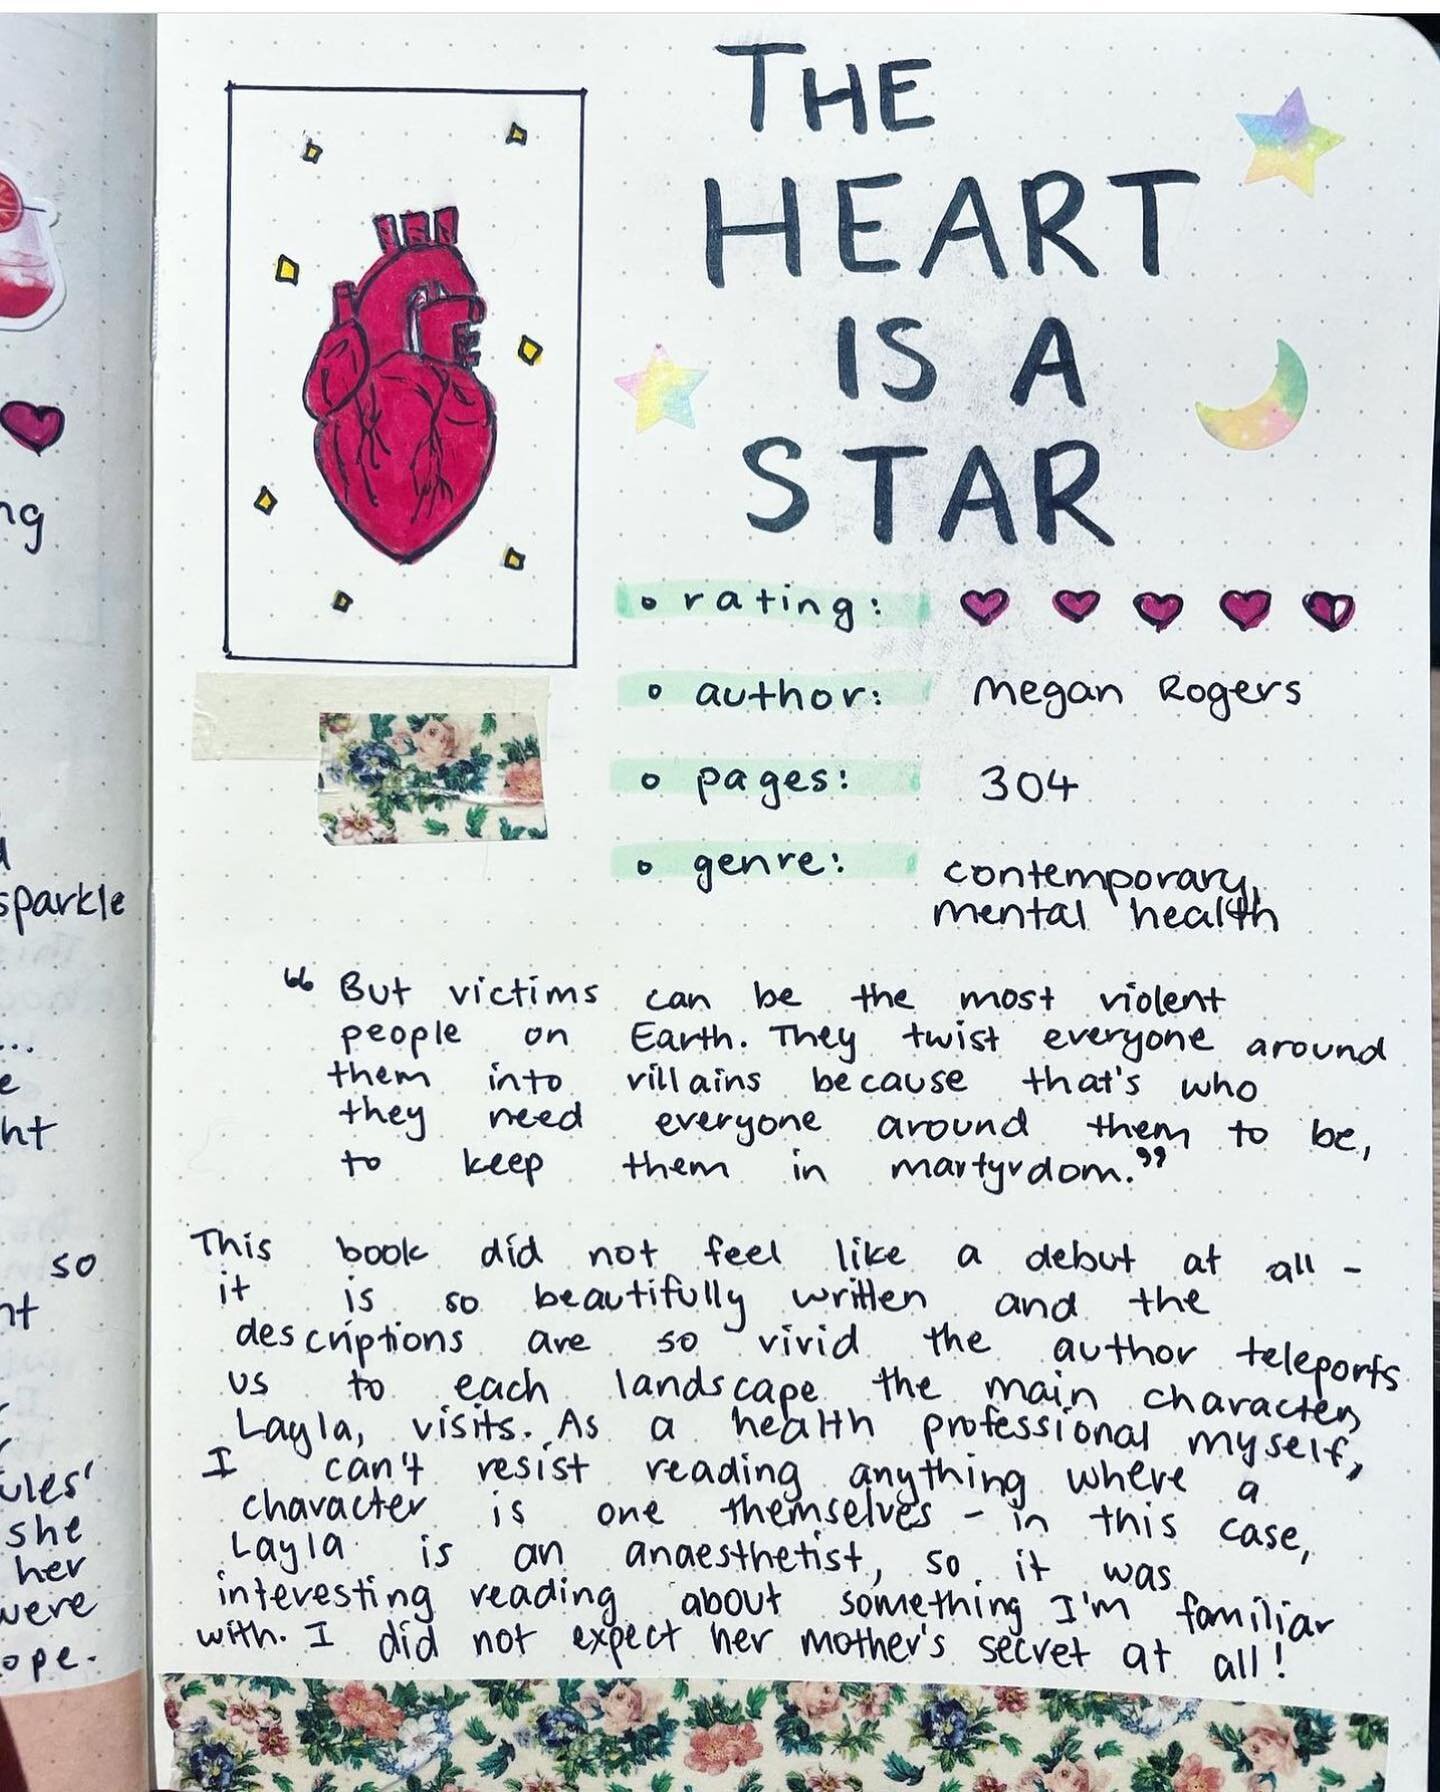 How beautiful is this hand-written review of The Heart is a Star 🥰

Thank you @katanabooks your notebook must be an awe inspiring sight to behold ✨✨

#TheHeartIsAStar #bookreview #bookreviews #meganrogers @harpercollinsaustralia @harpercollinsdesign